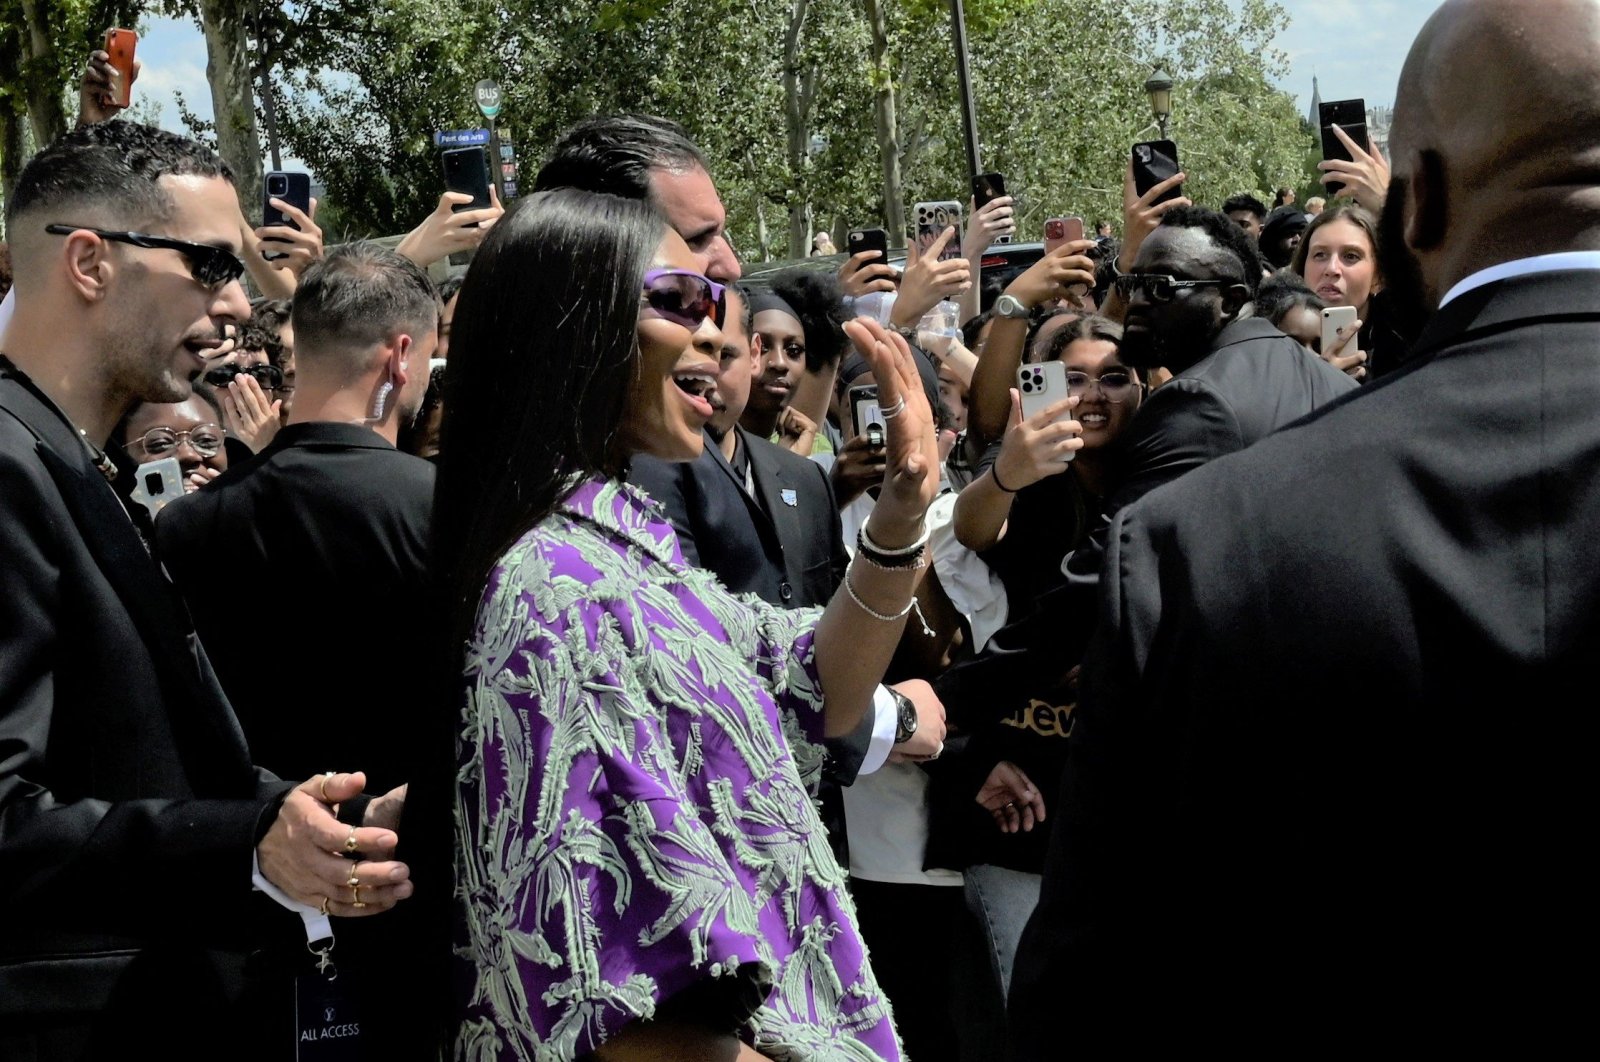 British model Naomi Campbell arrives to attend the Louis Vuitton Menswear Spring/Summer 2023 show, as part of Paris Fashion Week, Paris, France, June 23, 2022. (AFP Photo)